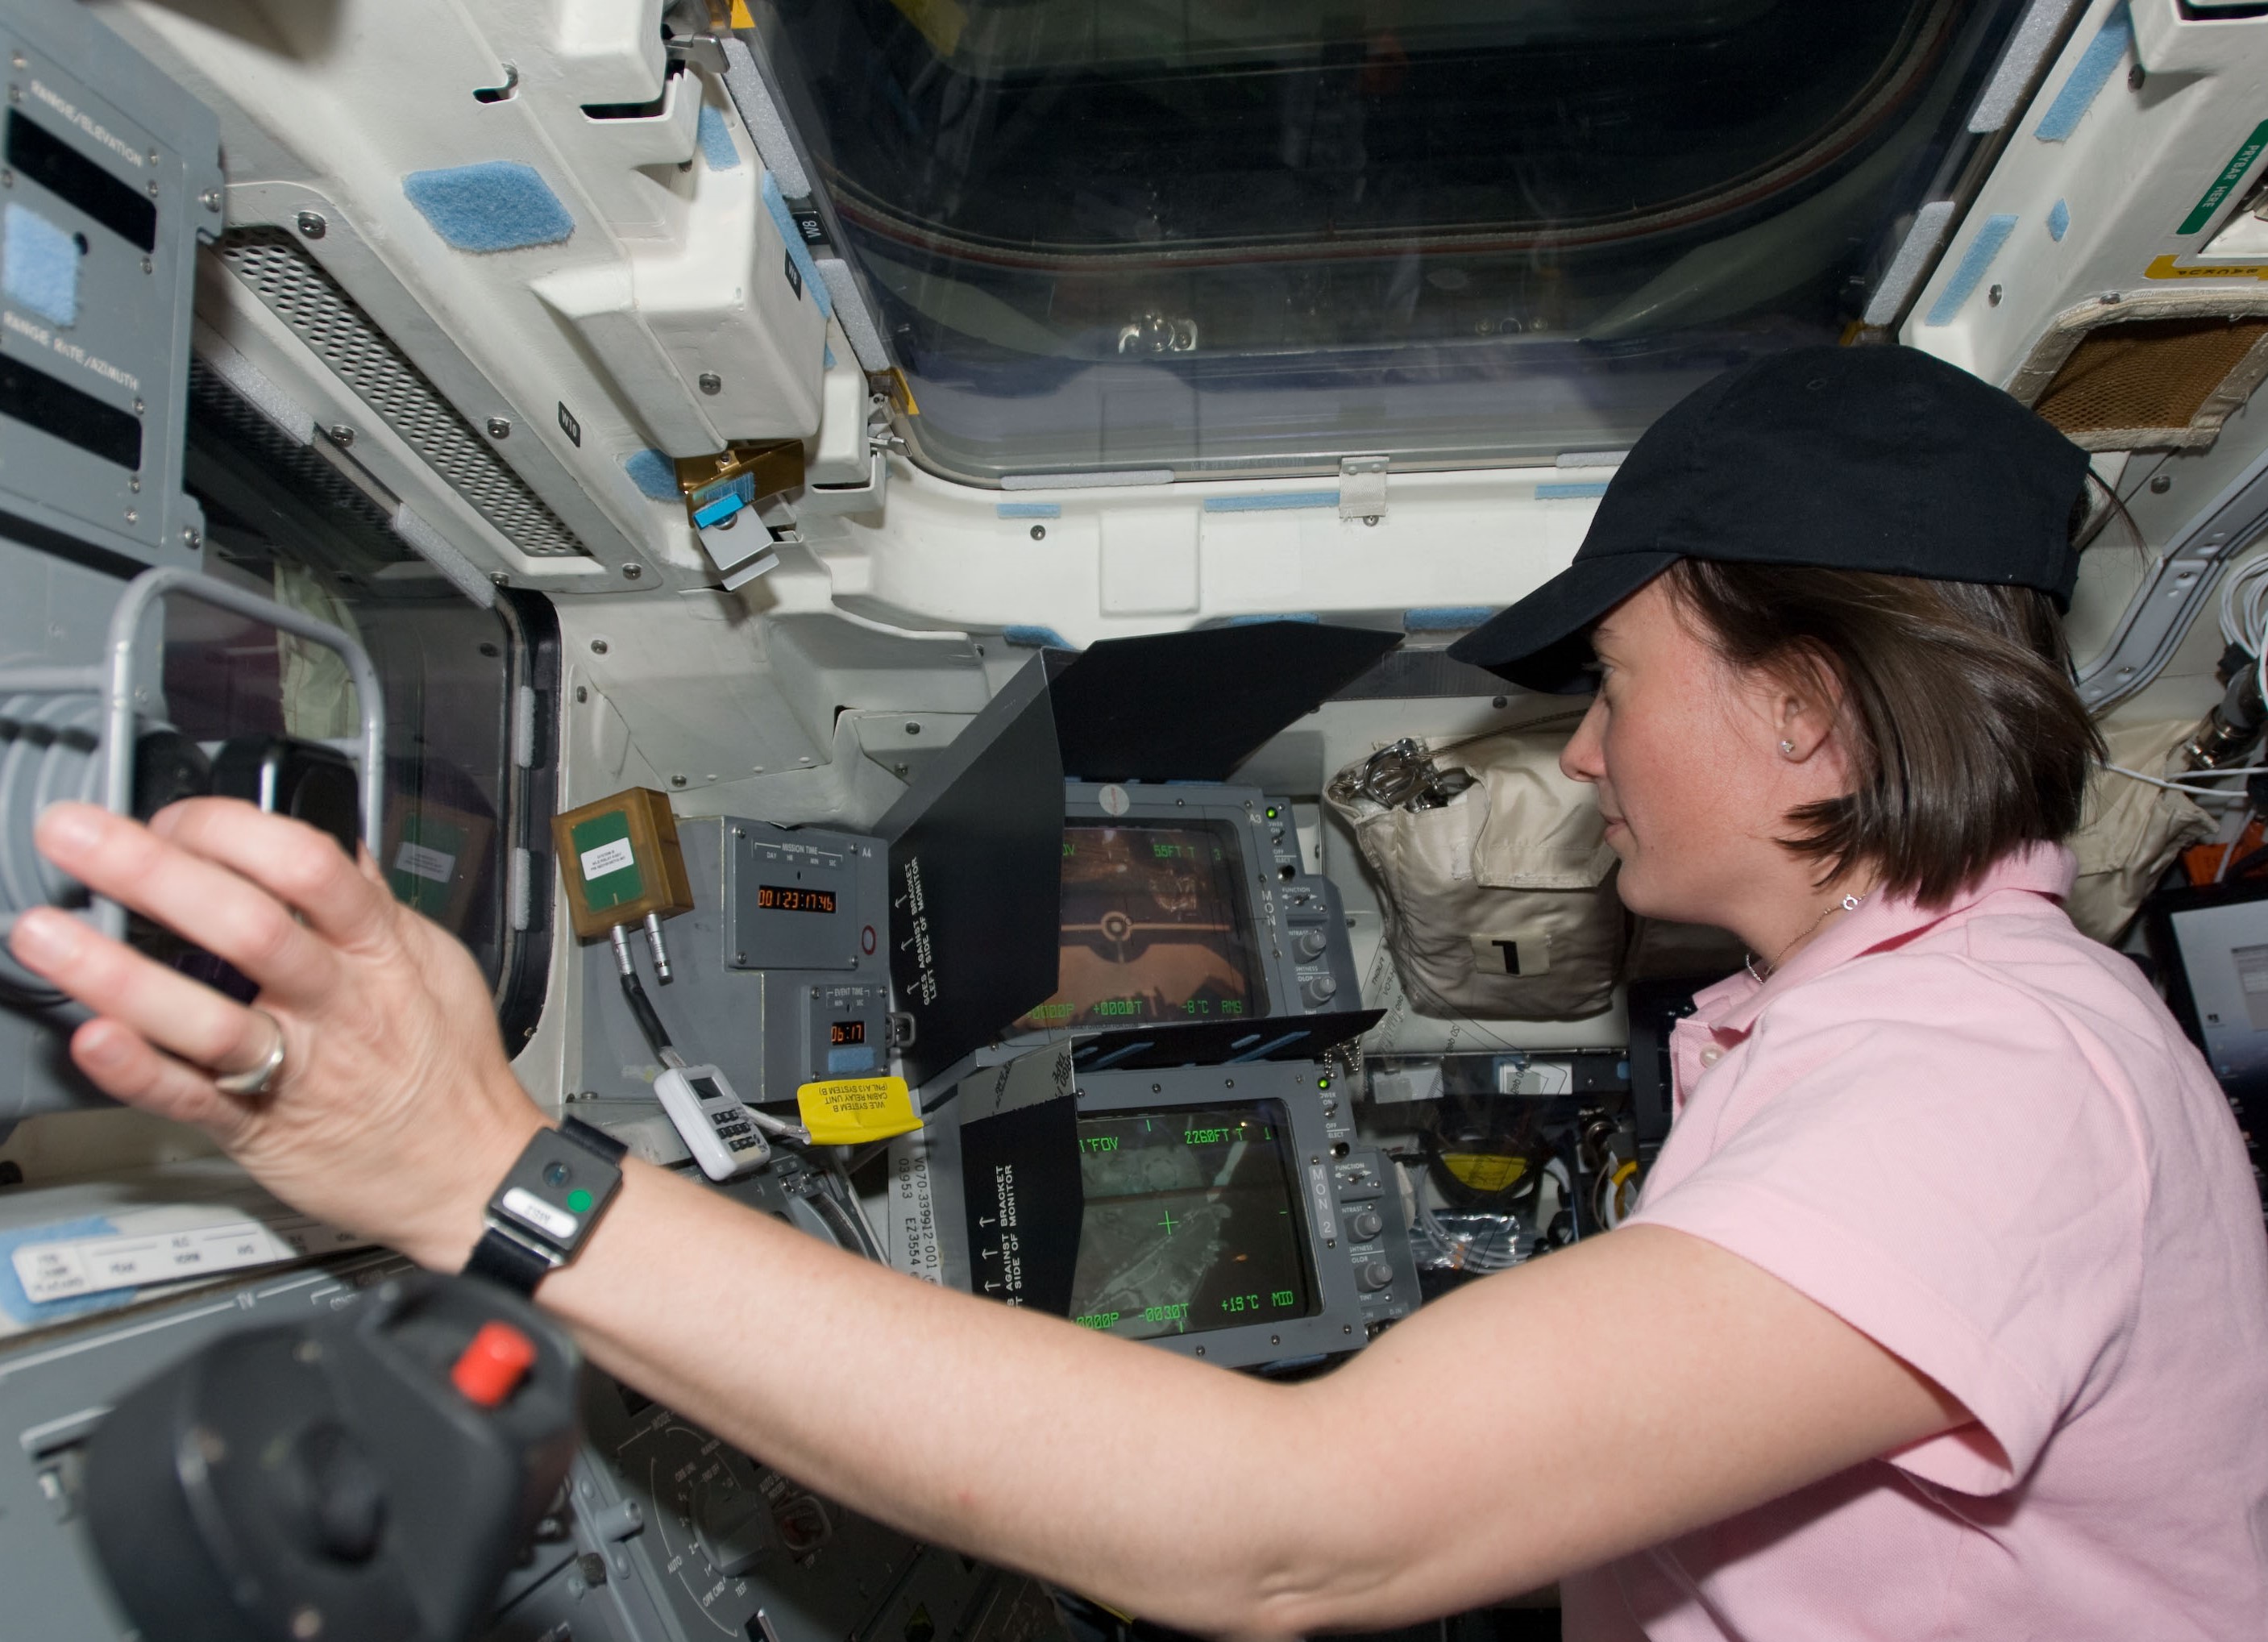 STS-125 astronaut K. Megan McArthur at the controls of the Remote Manipulator System (RMS), preparing to grapple Hubble